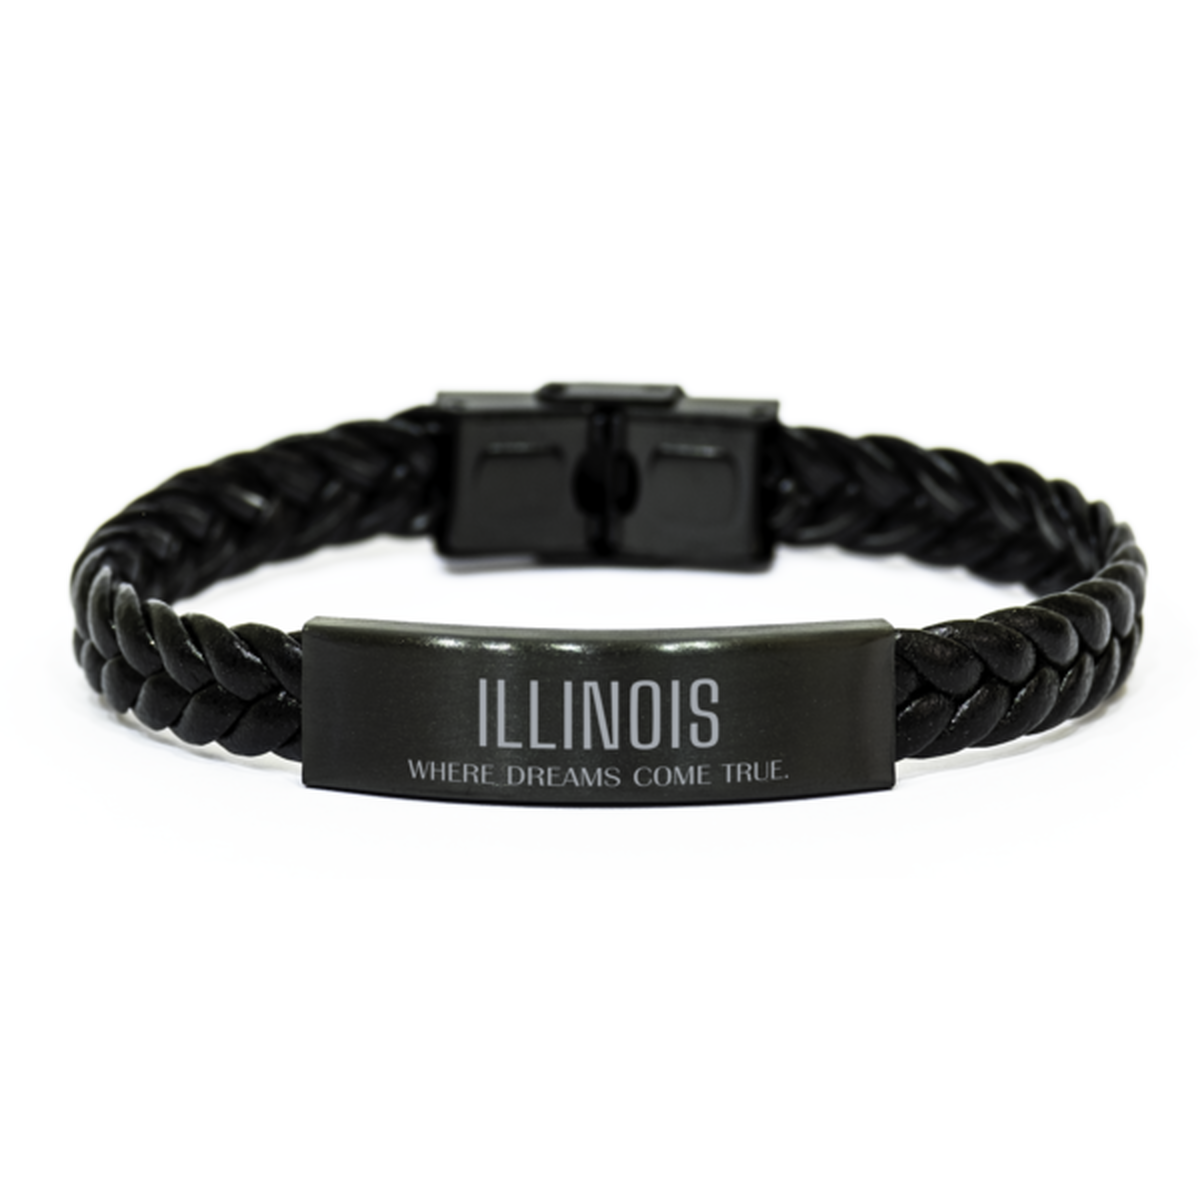 Love Illinois State Braided Leather Bracelet, Illinois Where dreams come true, Birthday Inspirational Gifts For Illinois Men, Women, Friends